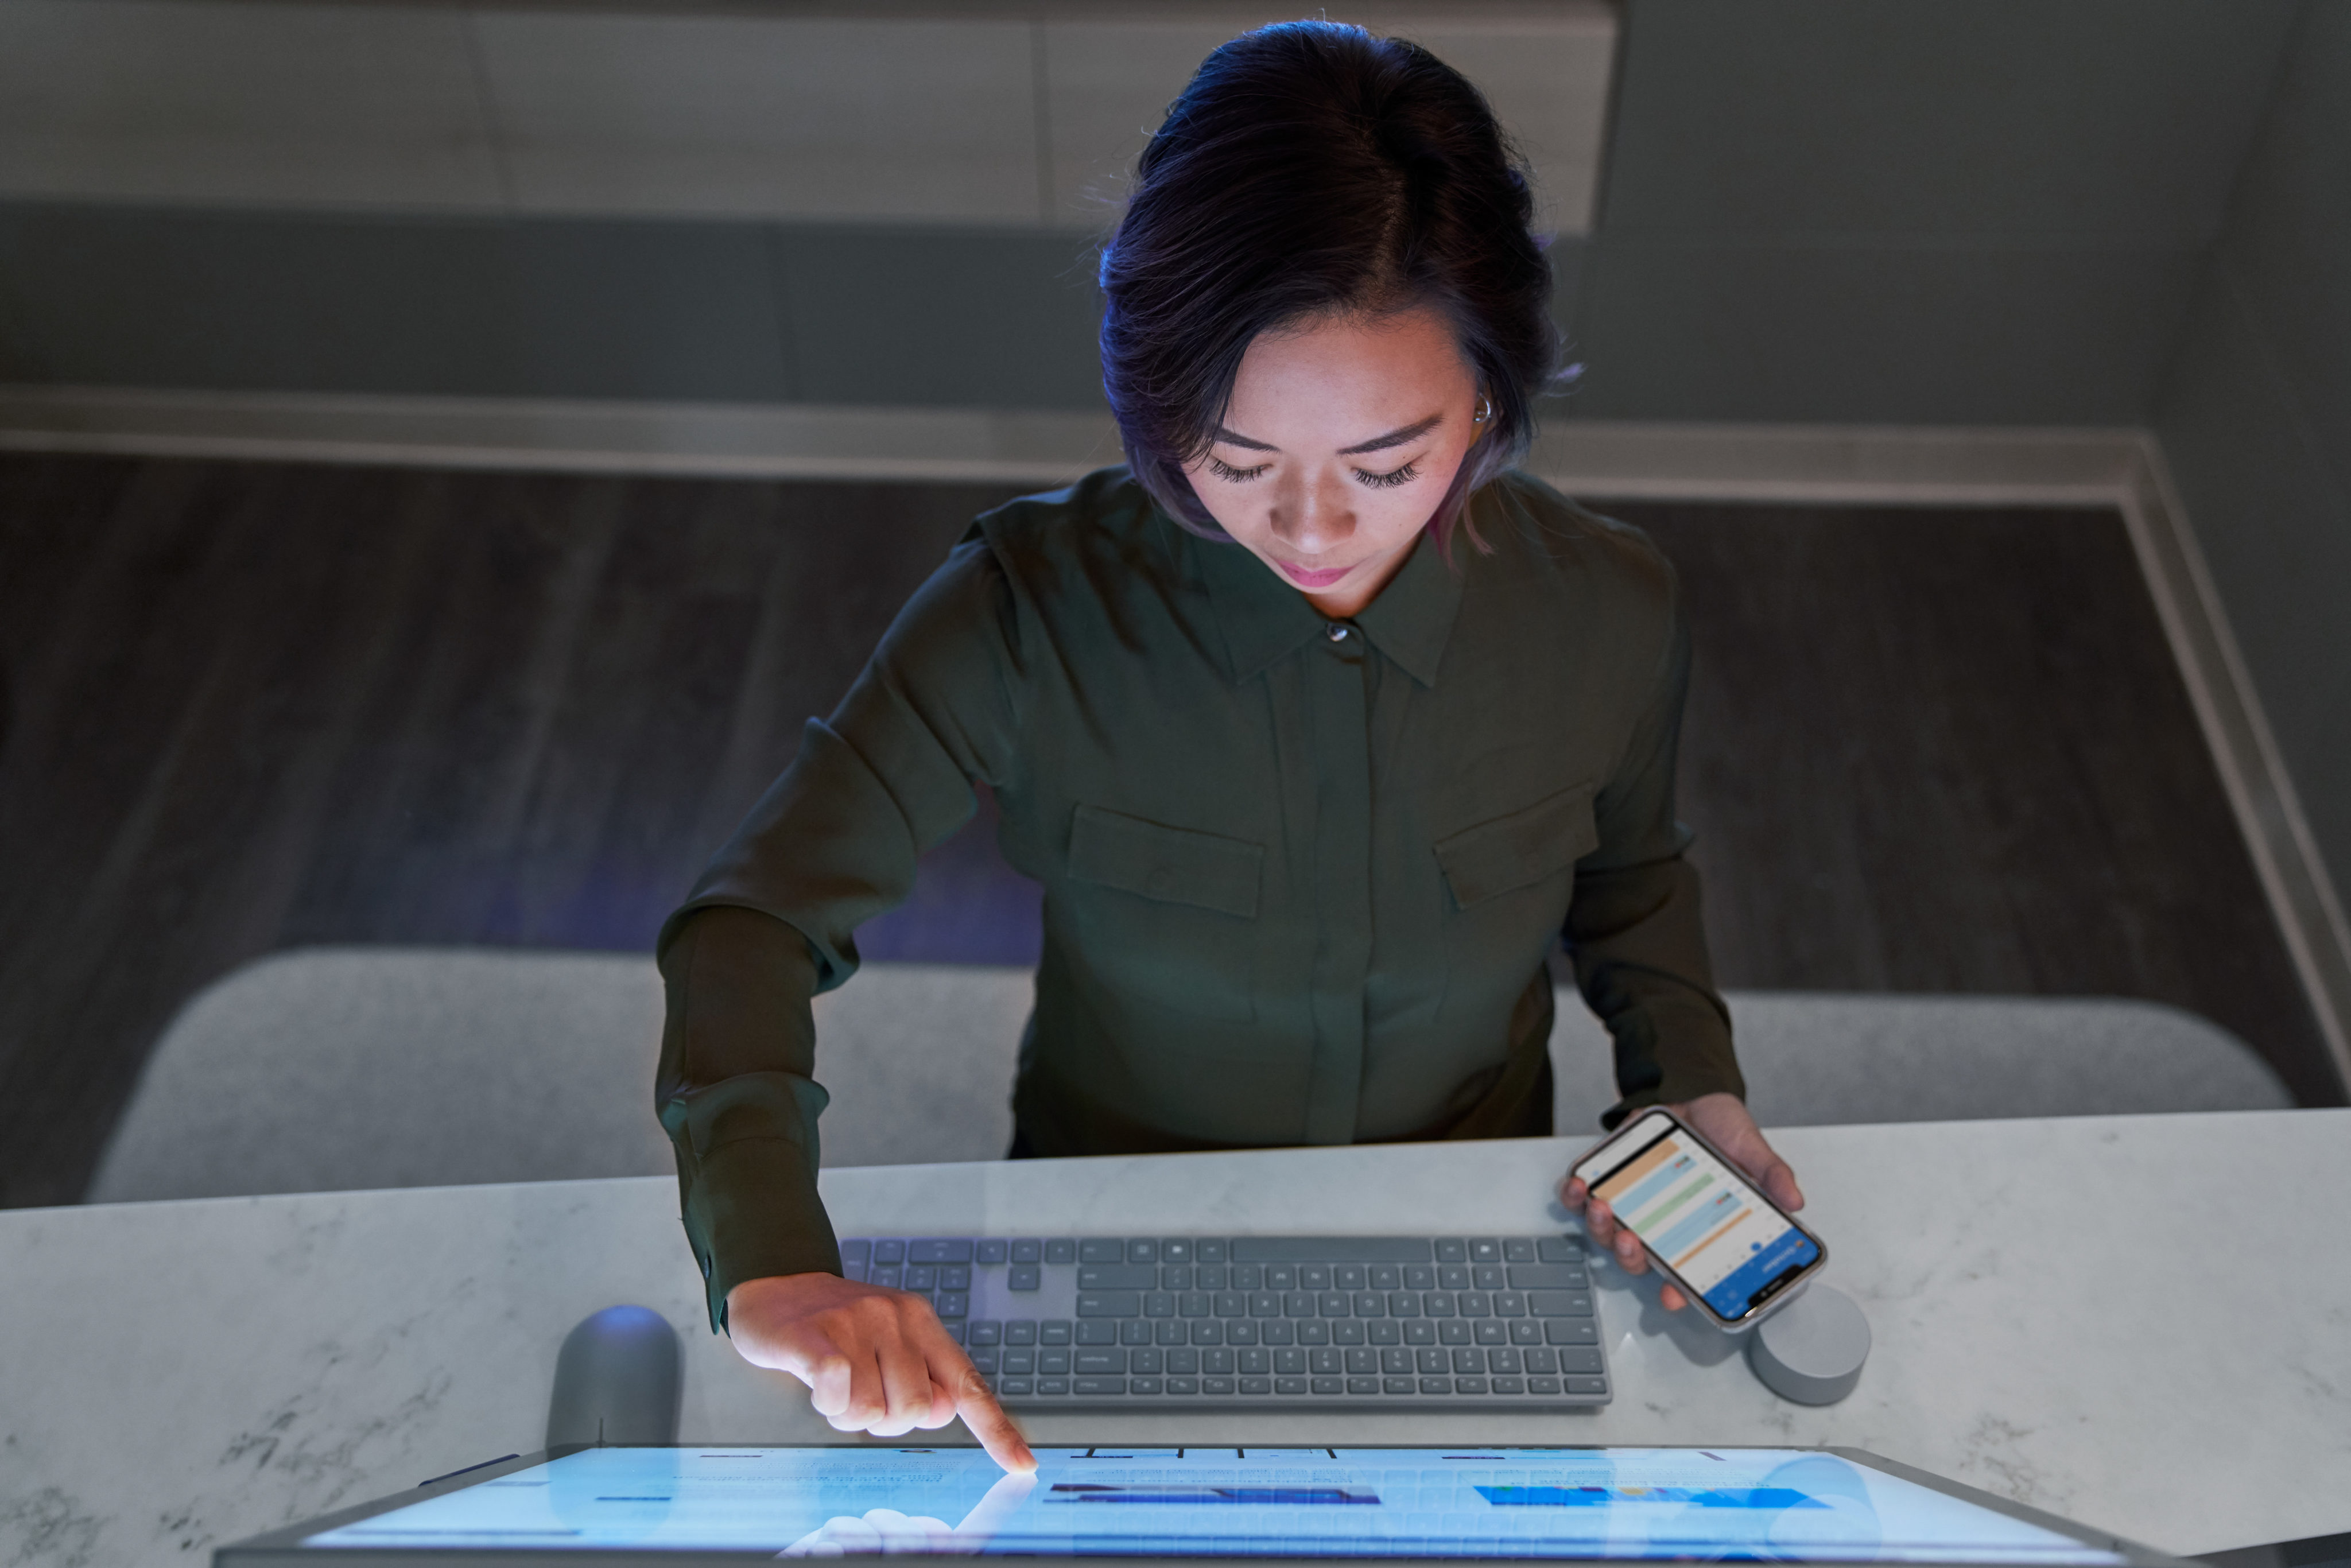 Top down view of a woman wearing a dark shirt in a dim office scrolling or working on a Microsoft Surface Studio and holding a phone.